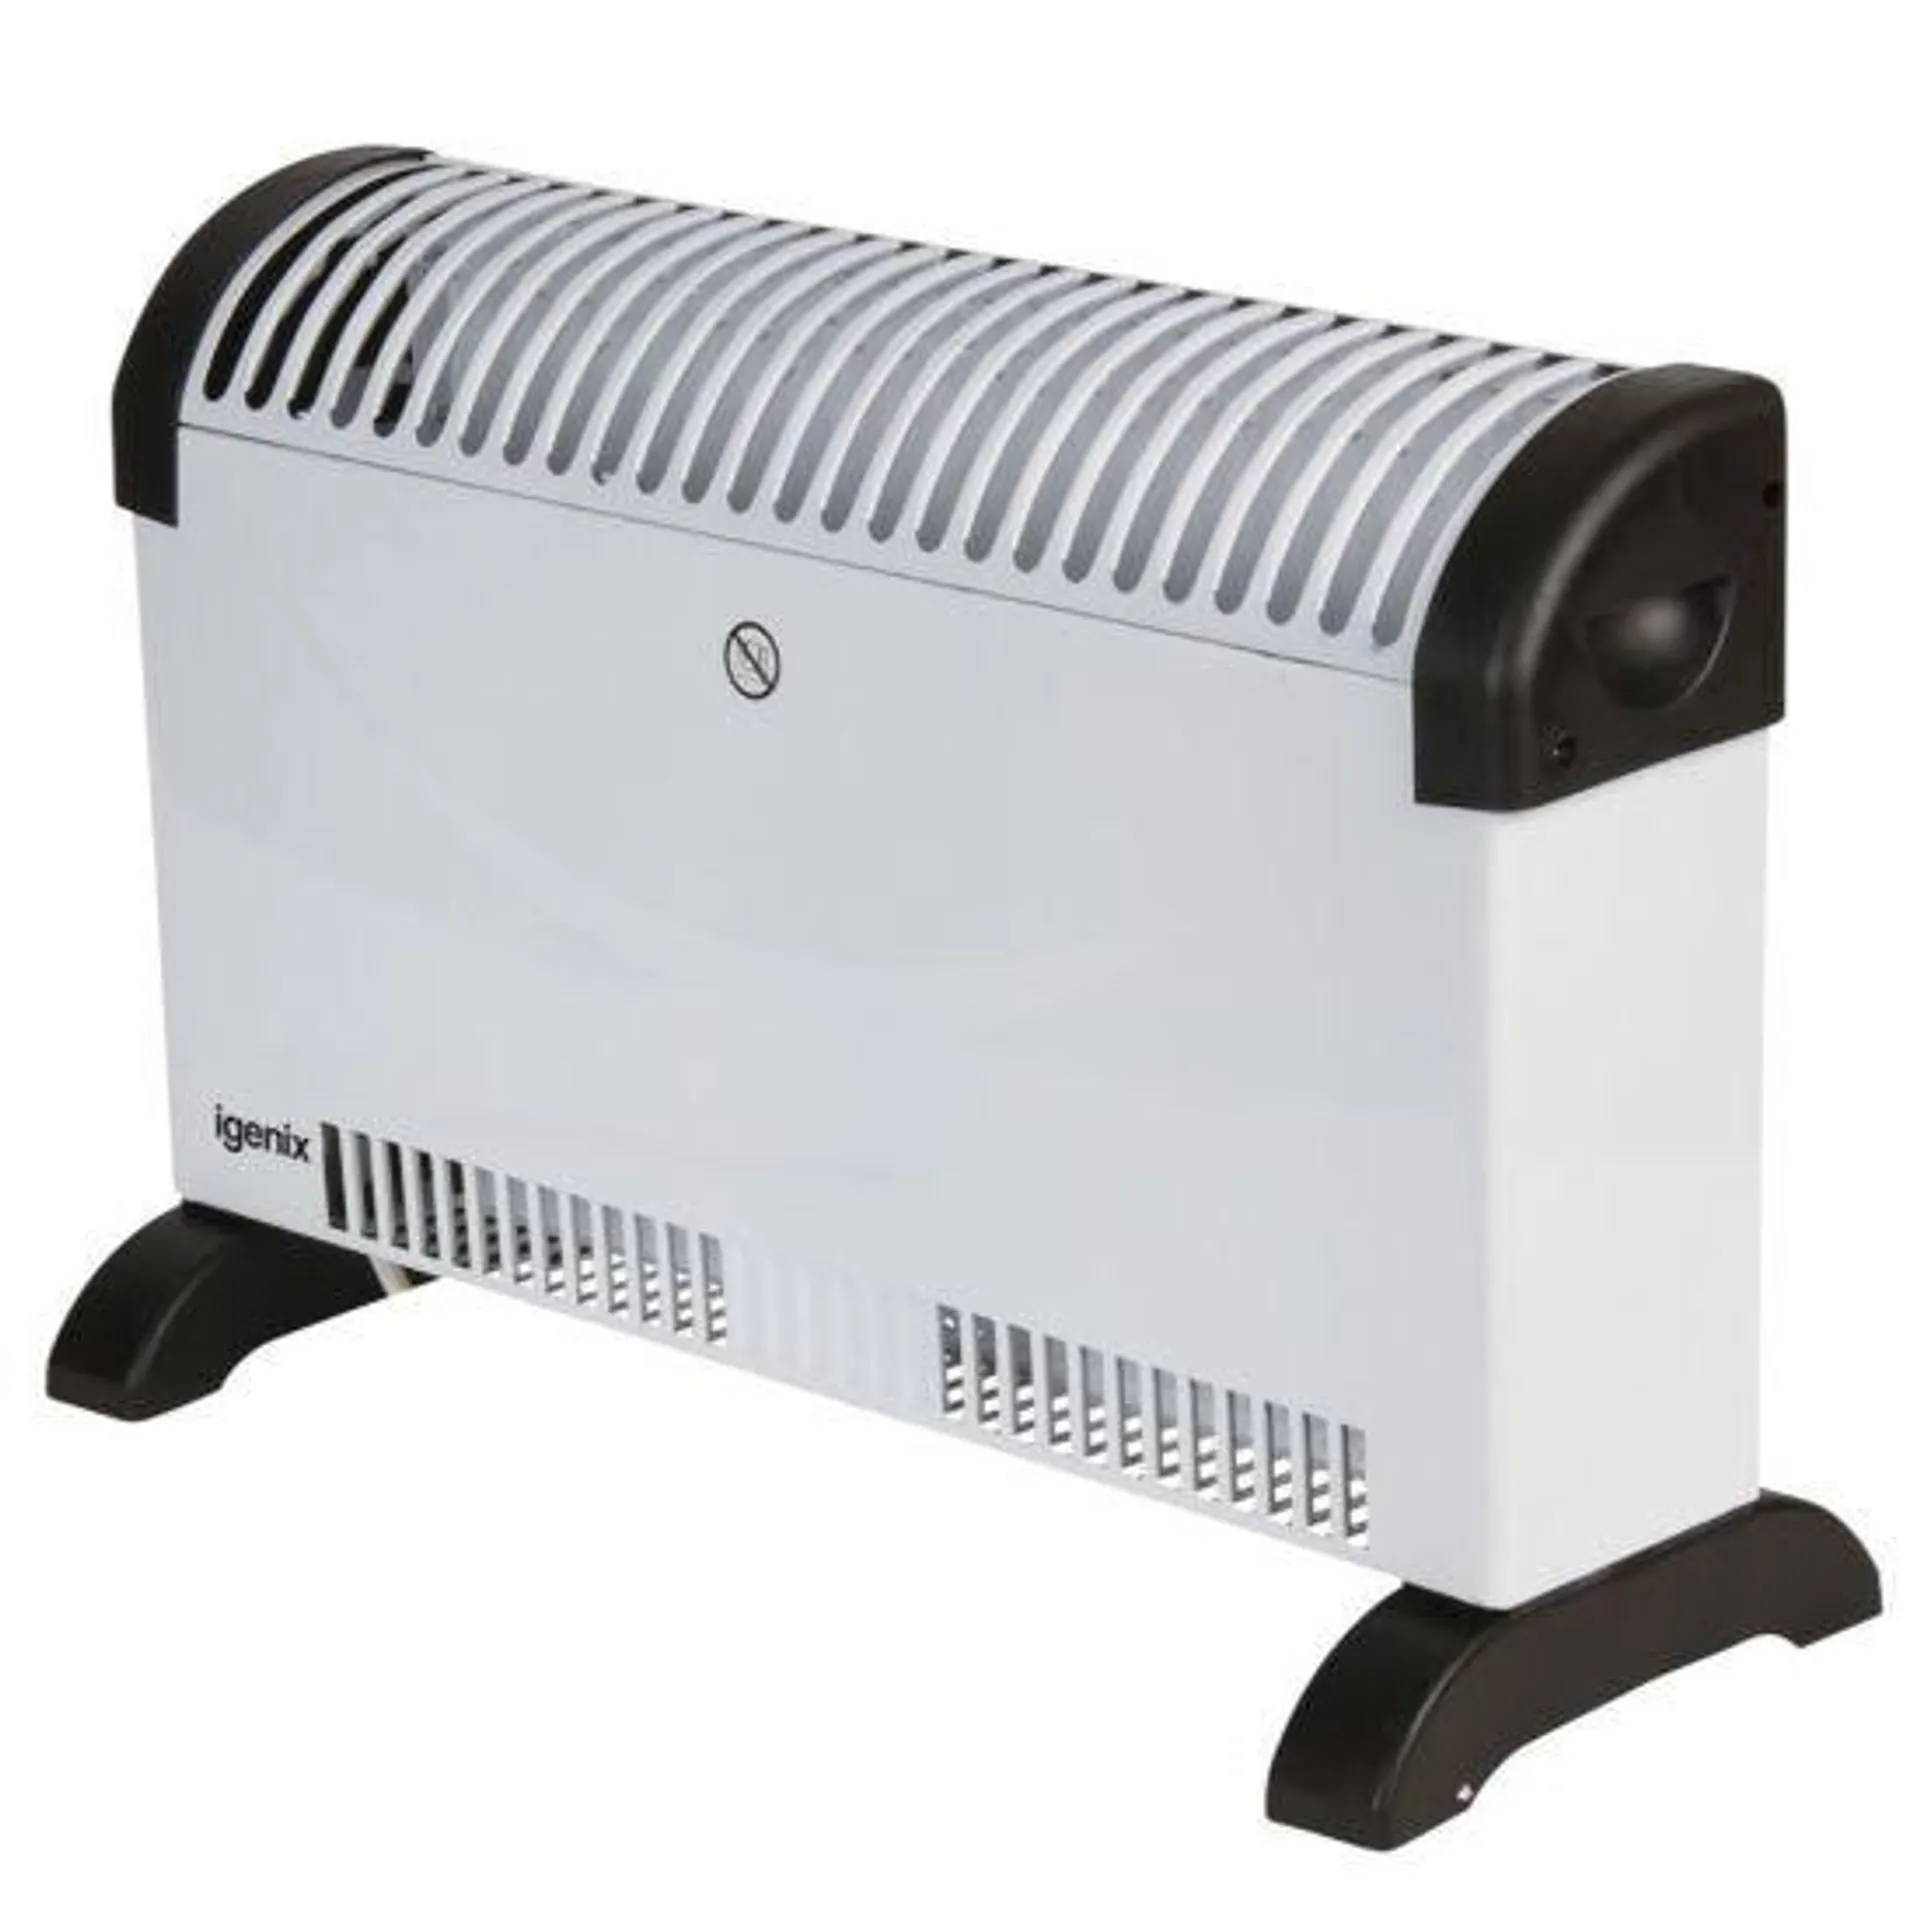 Igenix 2kW Convector Heater with Thermostat and Timer